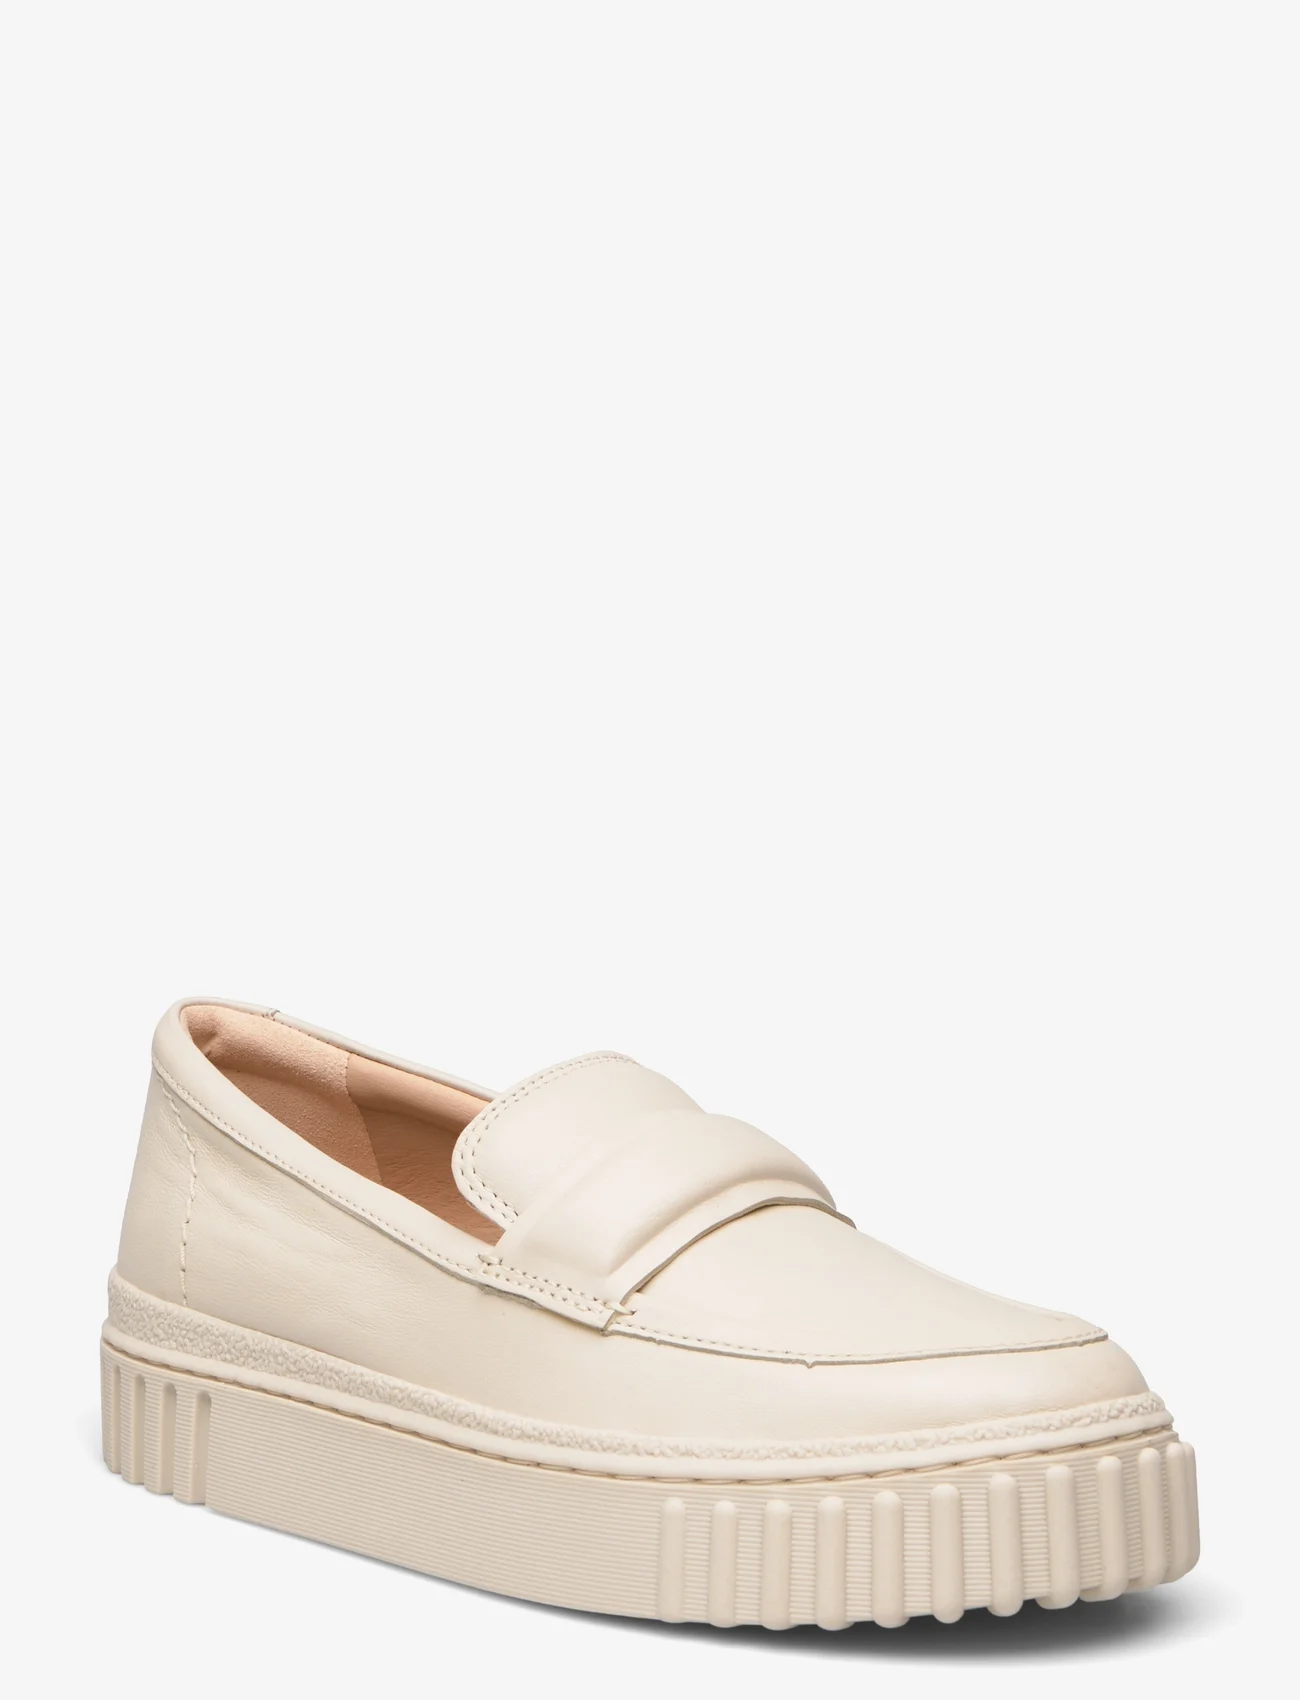 Clarks - Mayhill Cove D - fødselsdagsgaver - 1227 cream leather - 0